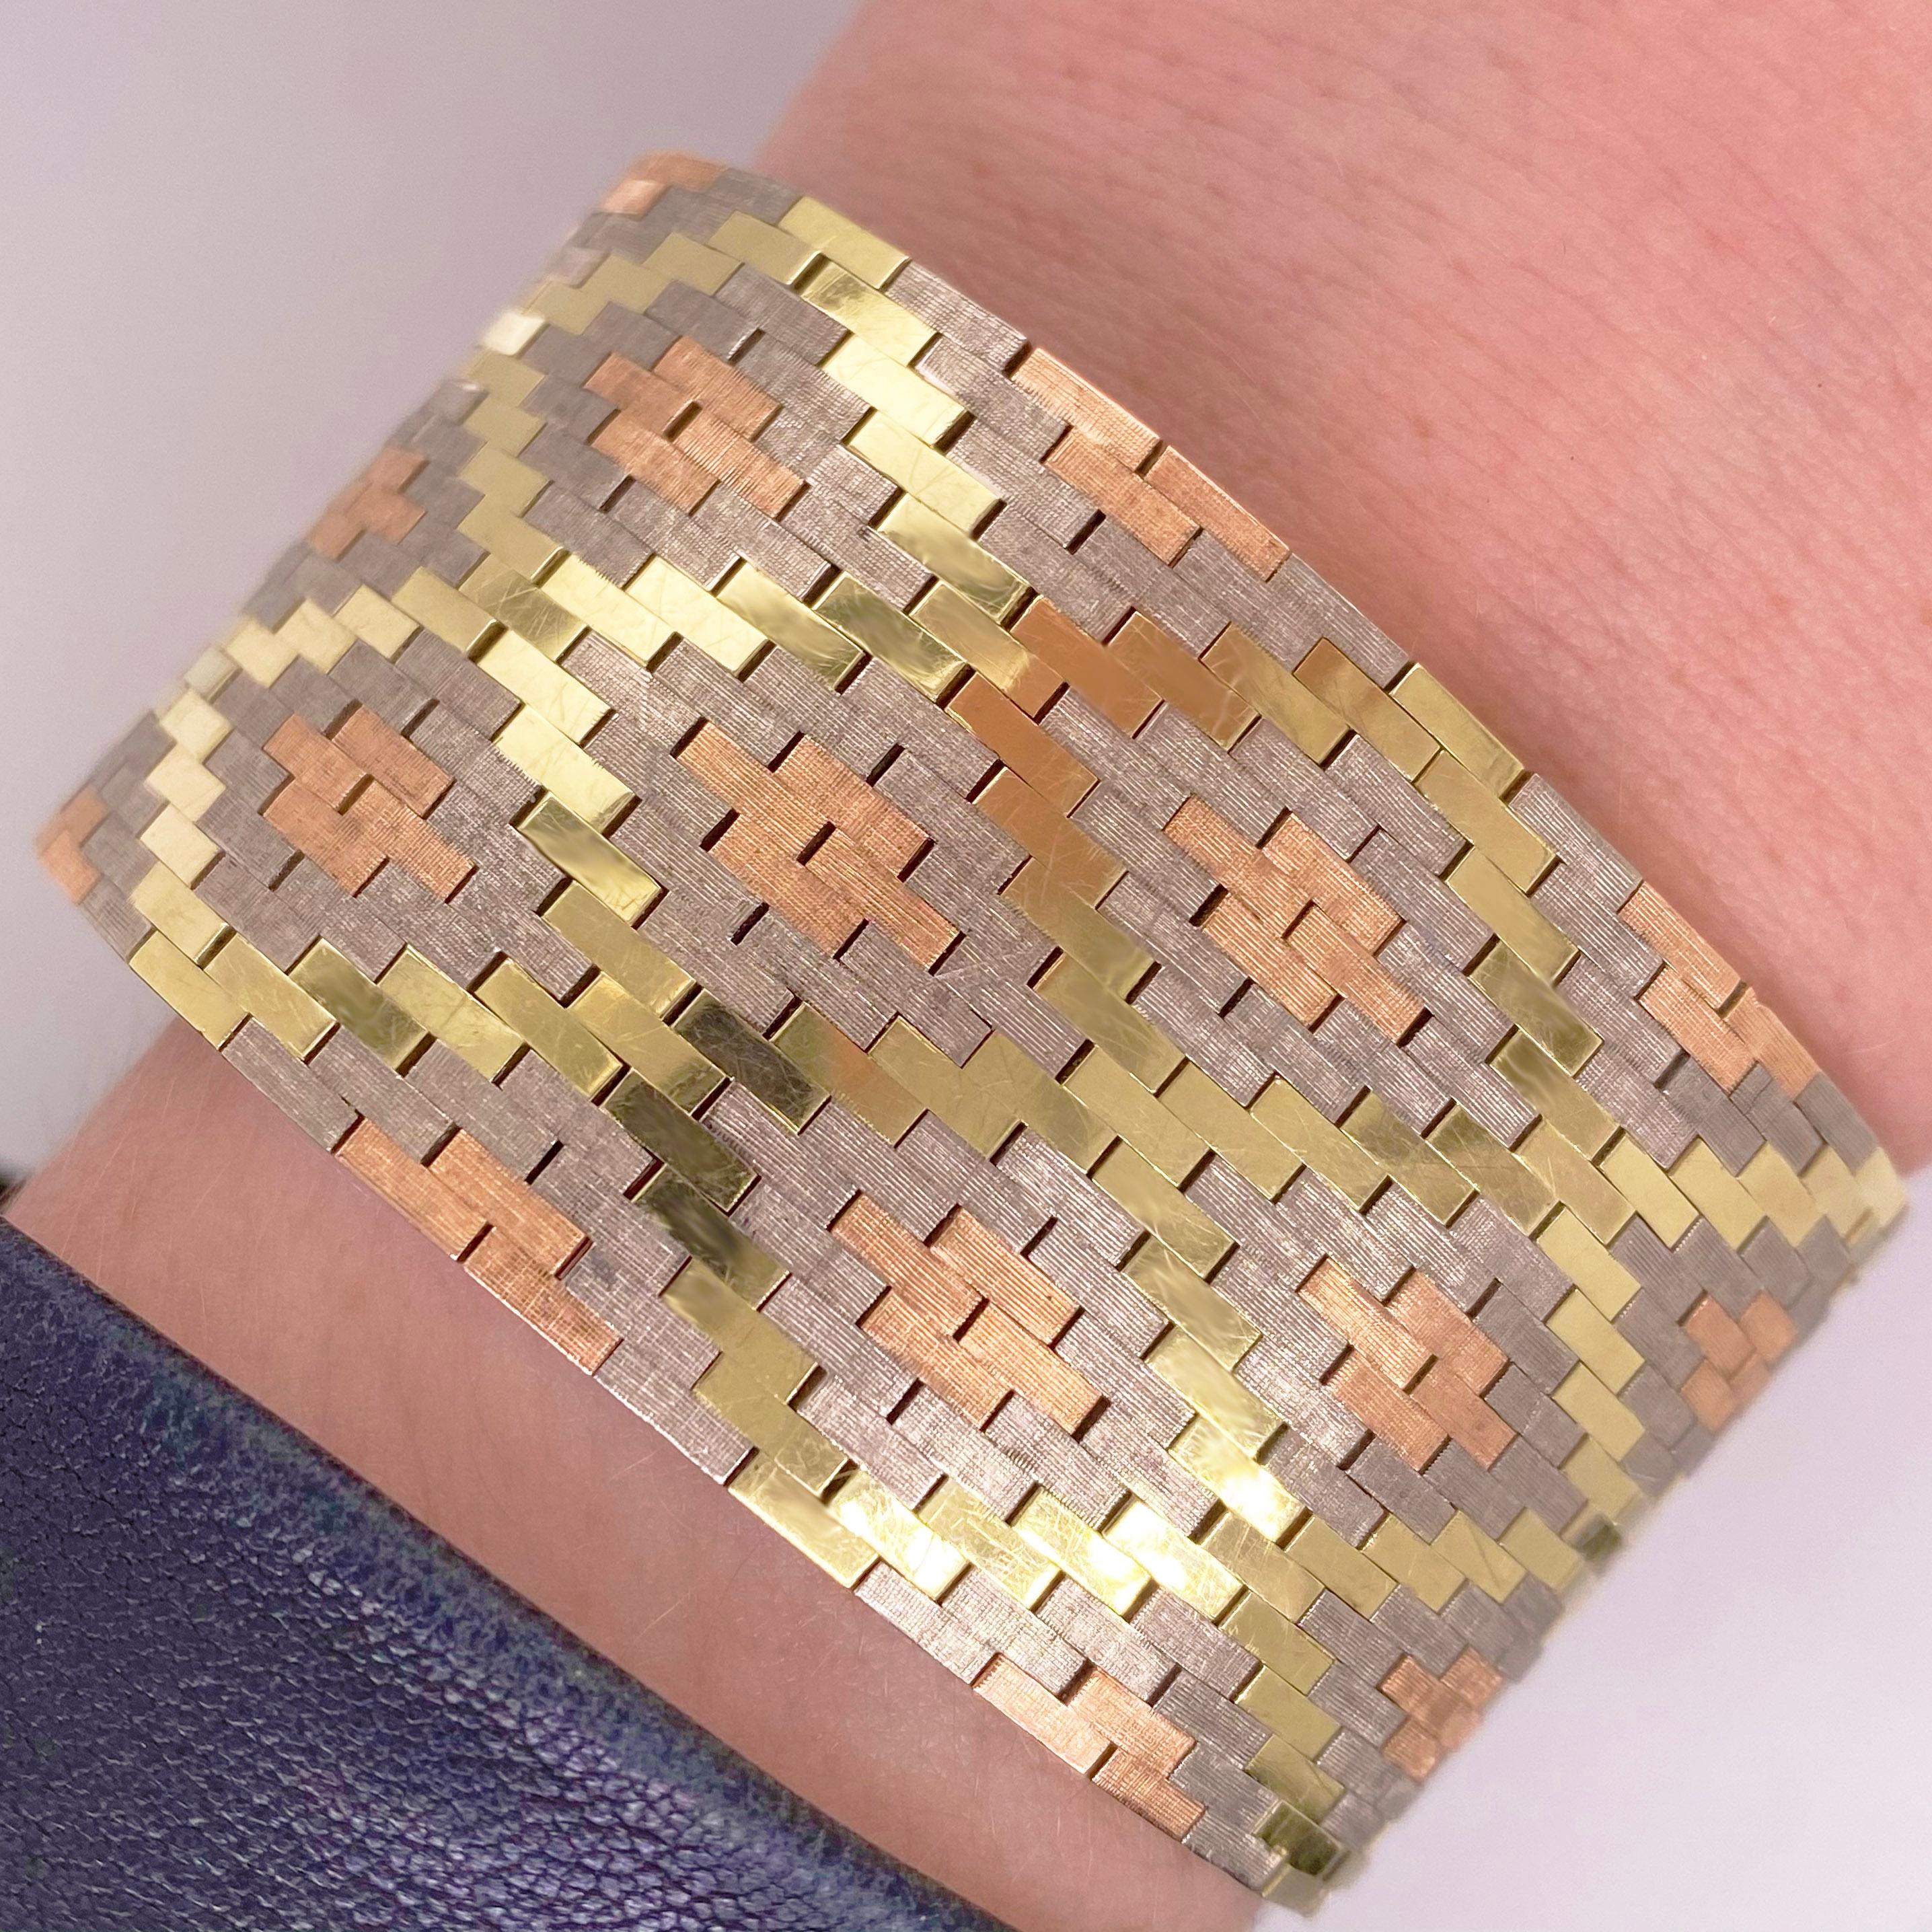  TRI-GOLD Estate Bracelet-made like butter!

This estate piece is a flexible bracelet that lays perfectly on any wrist with a timeless pattern that is still promenade in today's fashion. The bracelet has three natural gold colors made with 14 karat